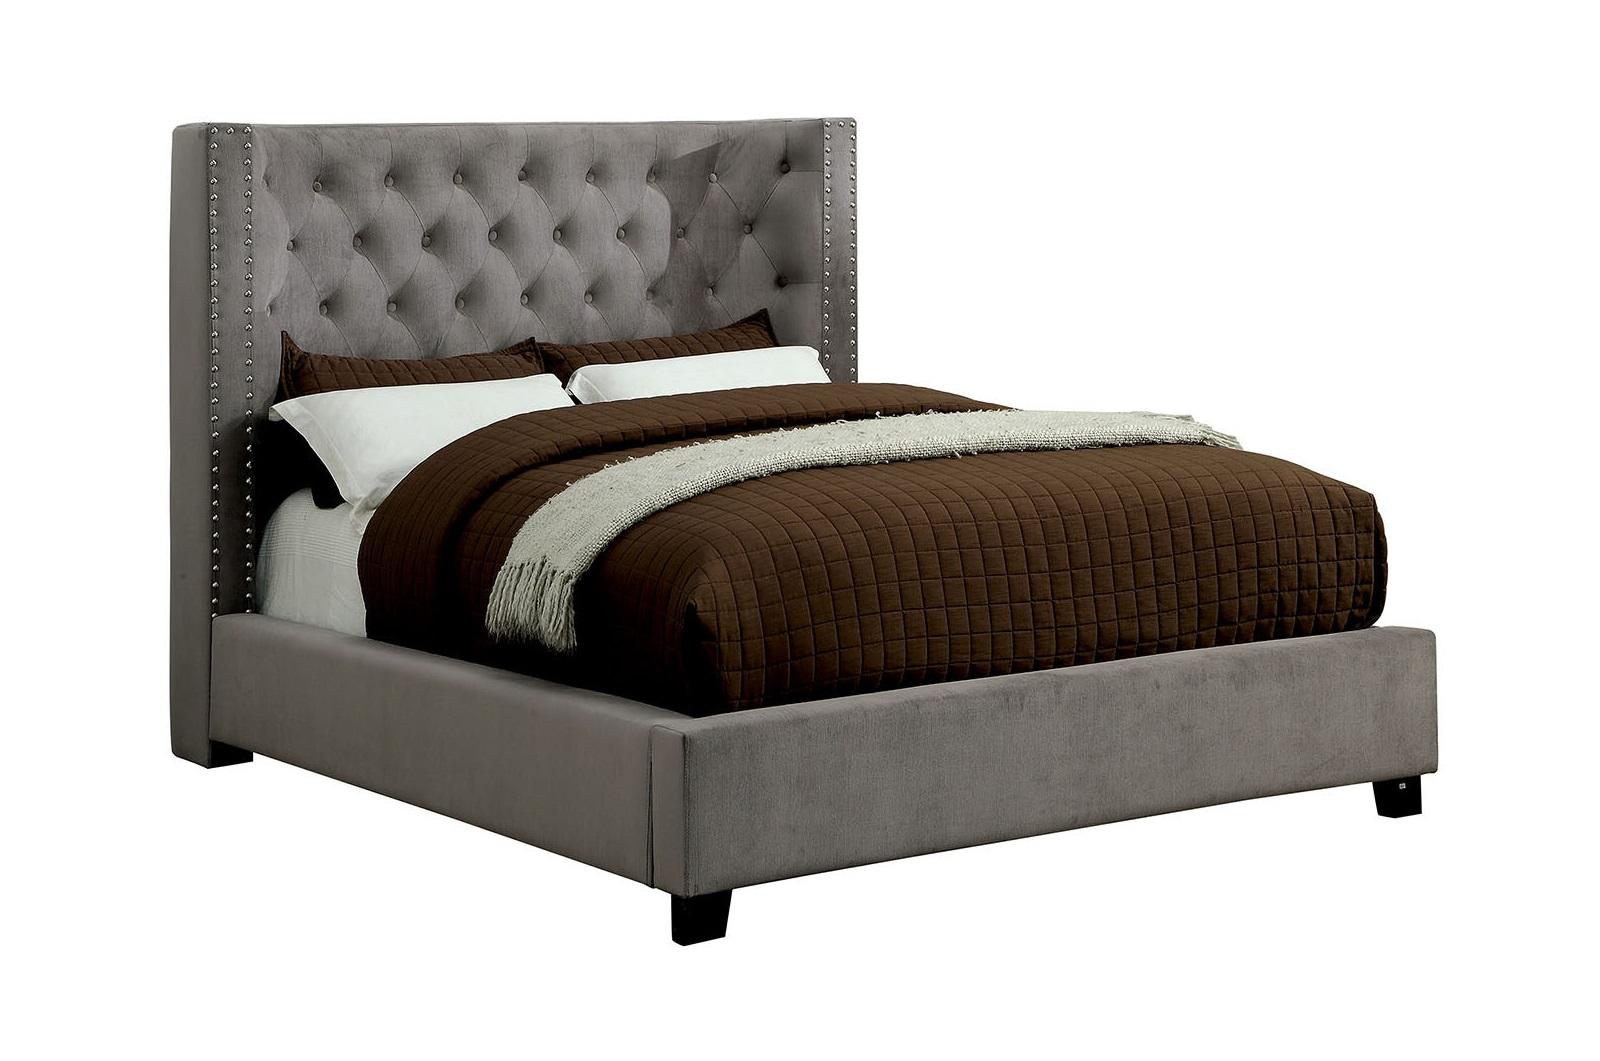 Transitional Platform Bed CM7779GY-Q Cayla CM7779GY-Q in Gray 